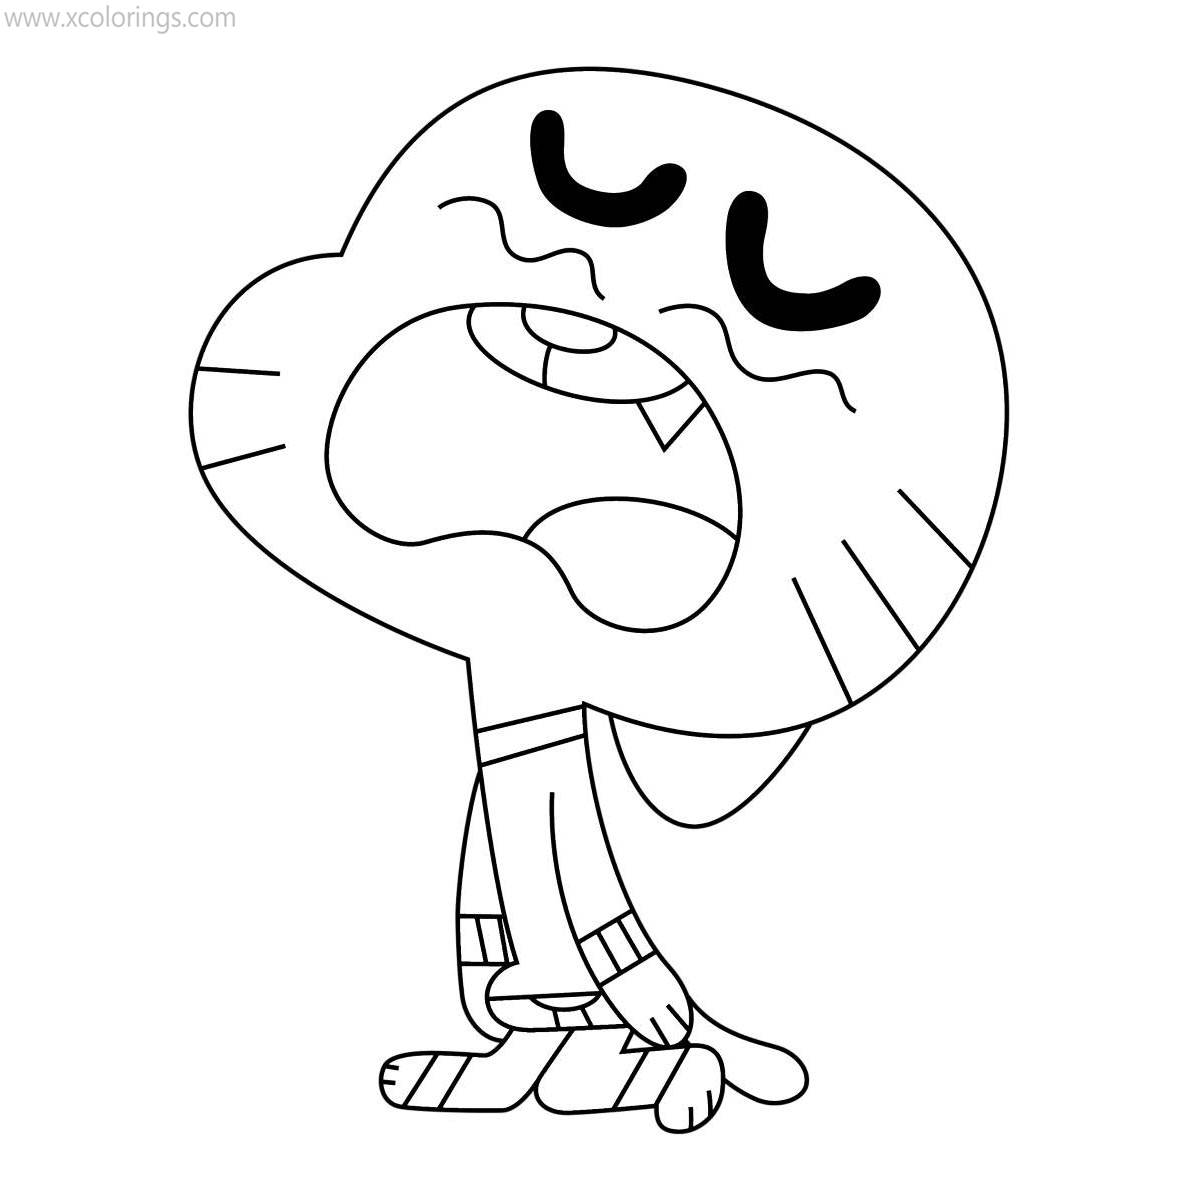 Free The Amazing World of Gumball Coloring Pages The Boy is Crying printable